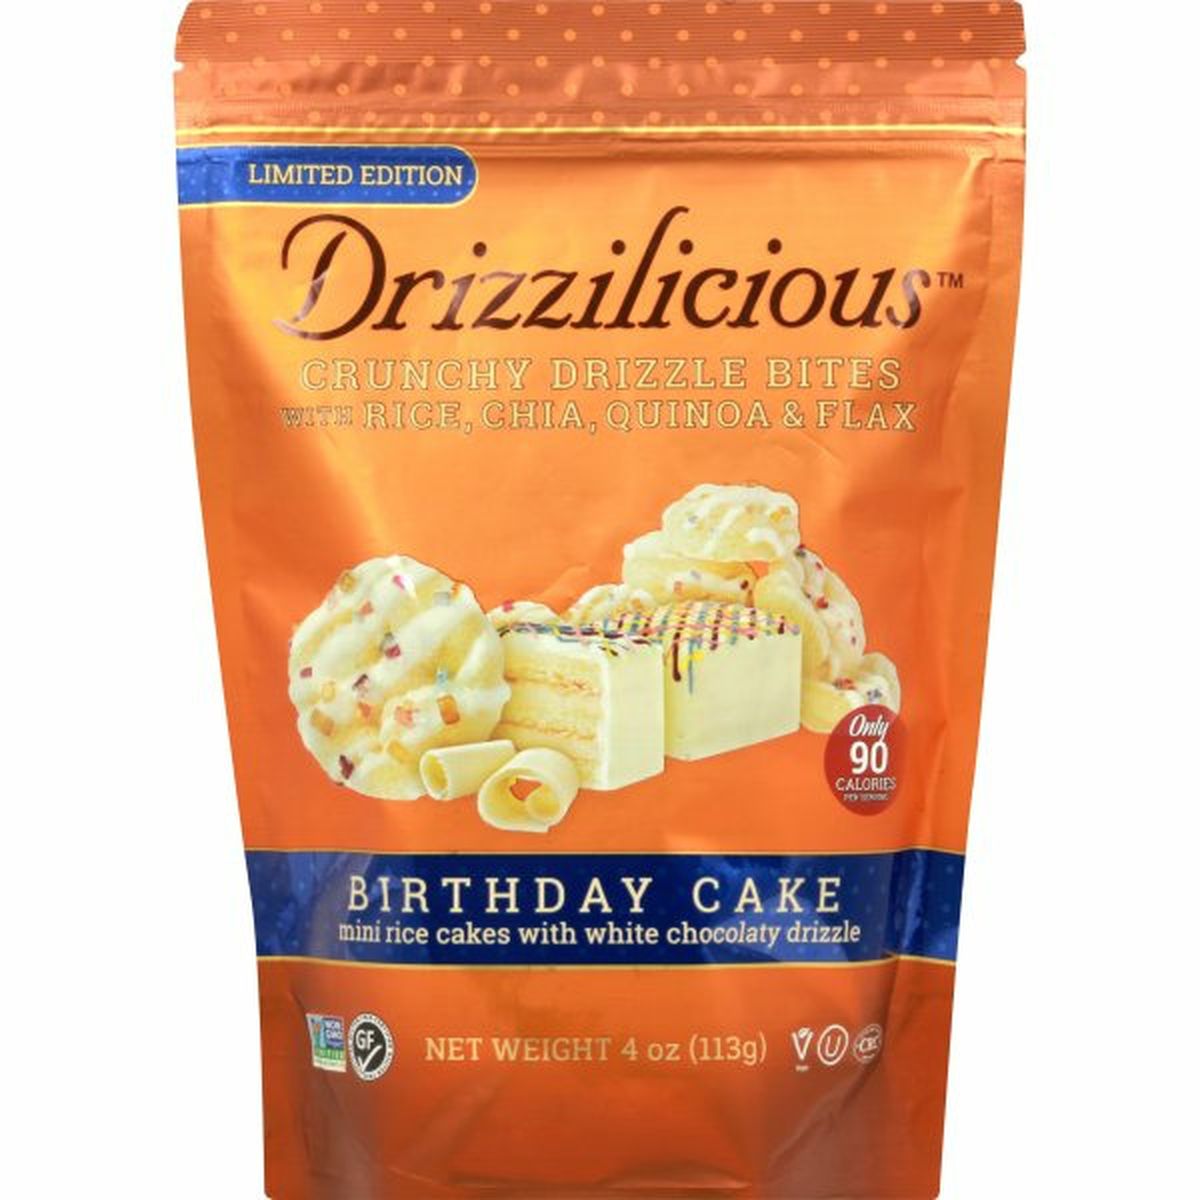 Calories in Drizzilicous Drizzle Bites, Crunchy, Birthday Cake